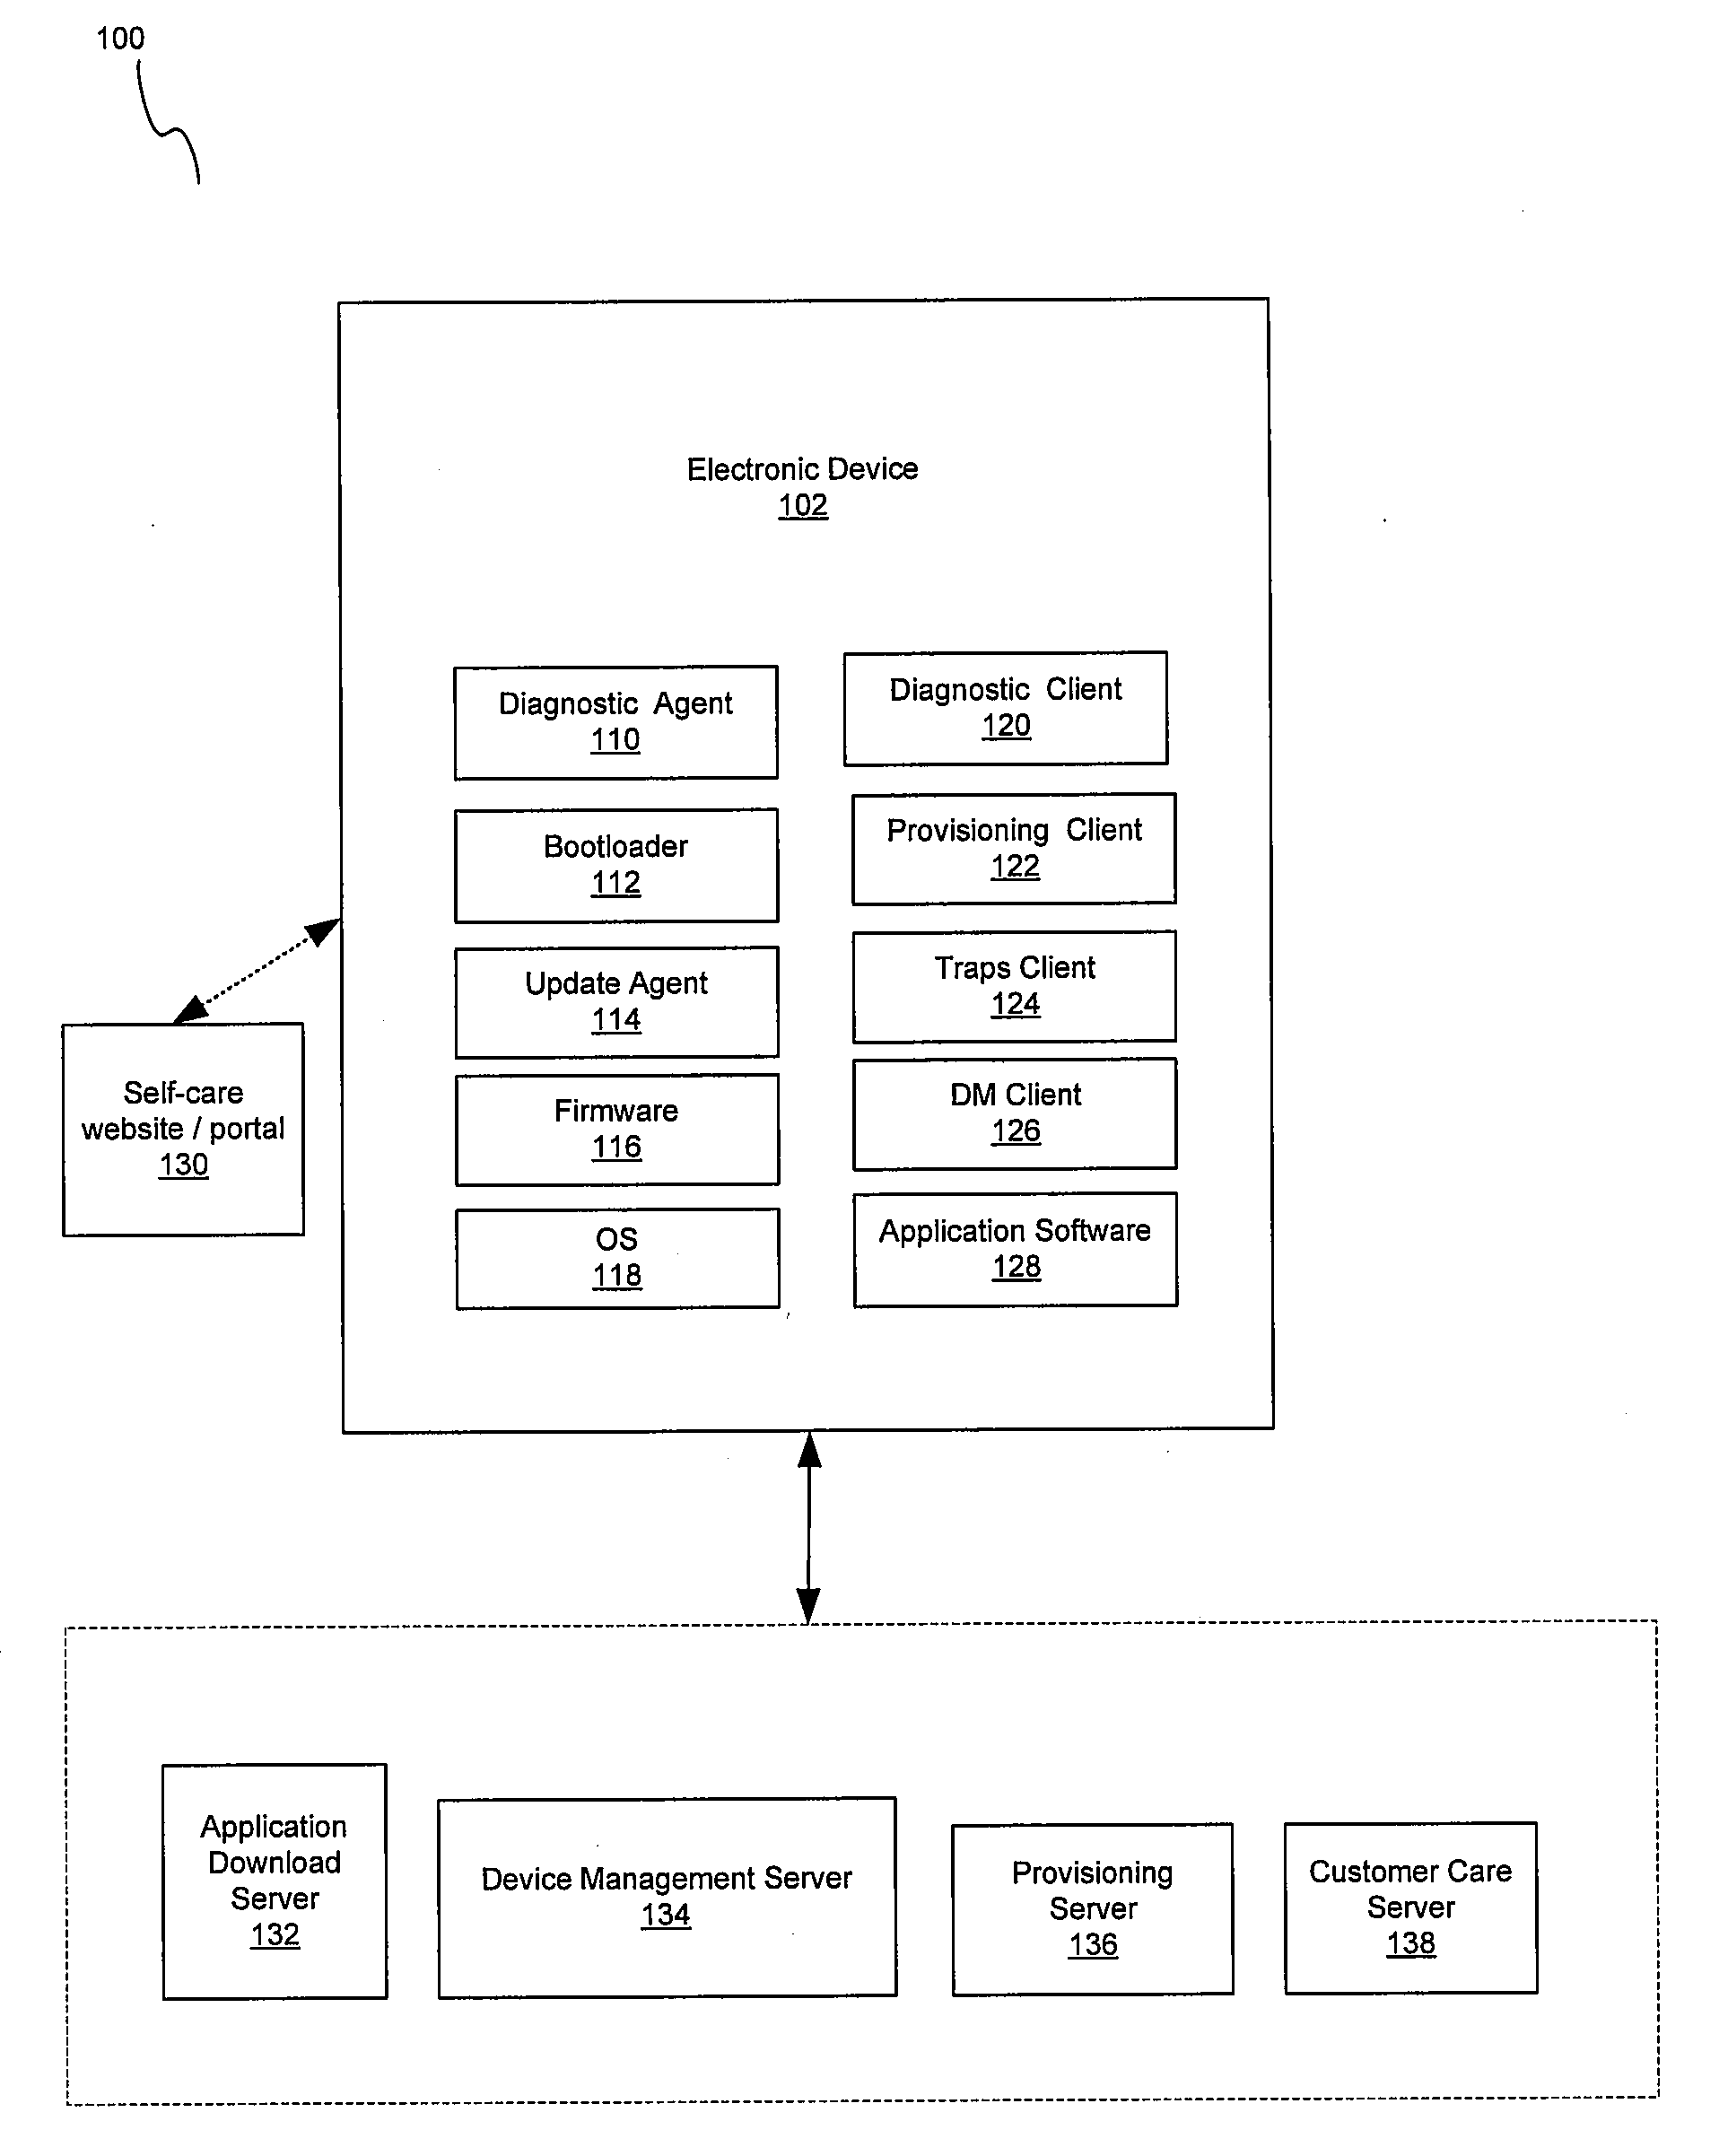 Device and Network Capable of Mobile Device Management